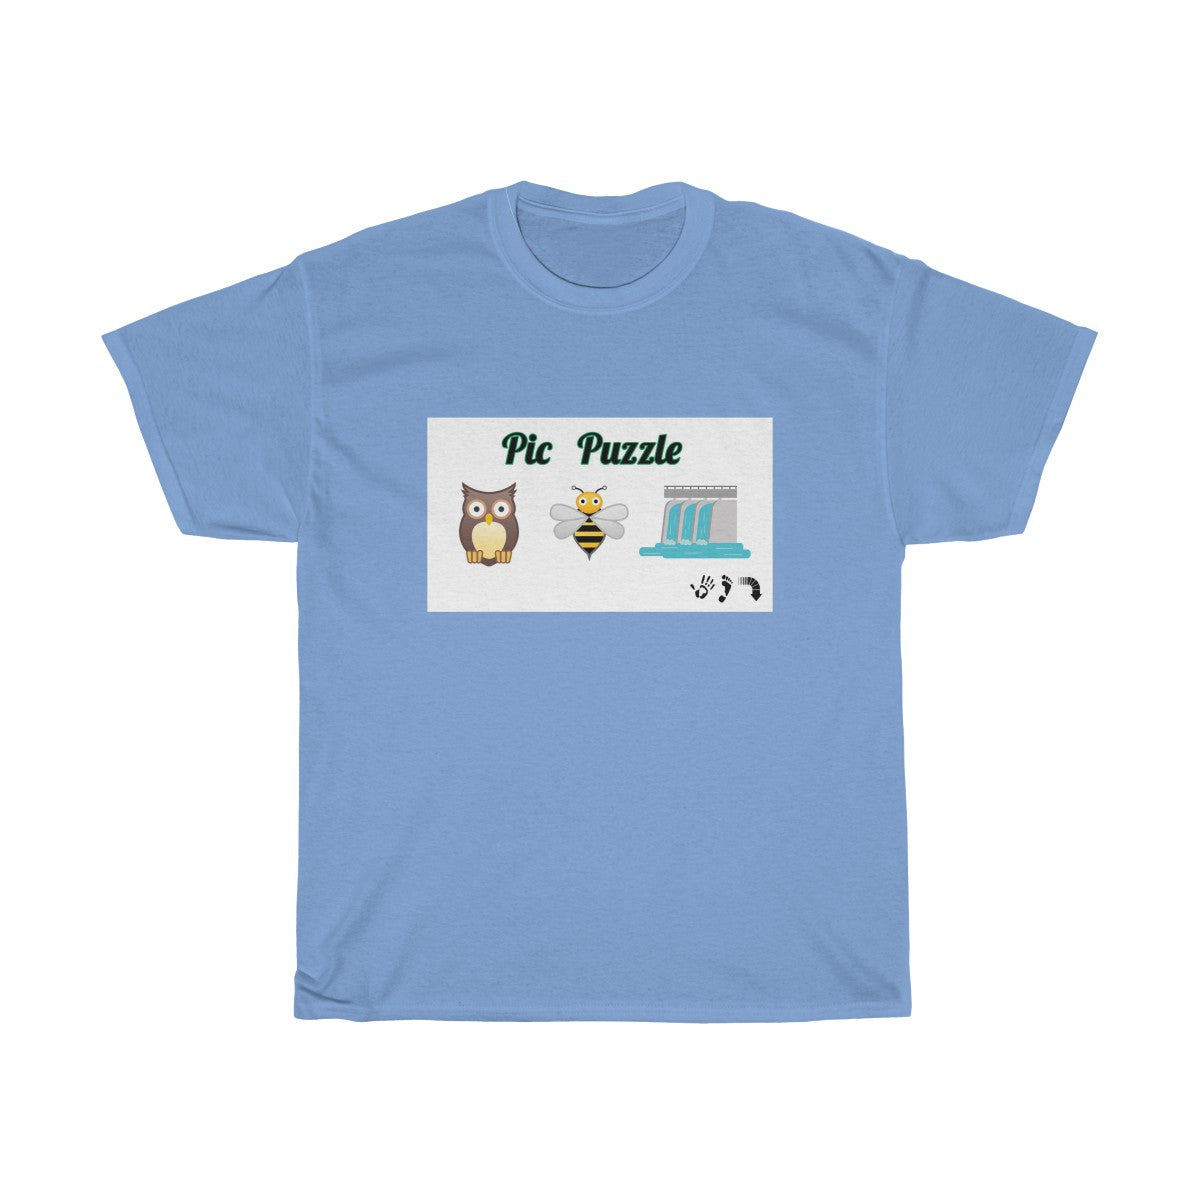 Five Toes Down Pic Puzzle Unisex Tee (Owl)